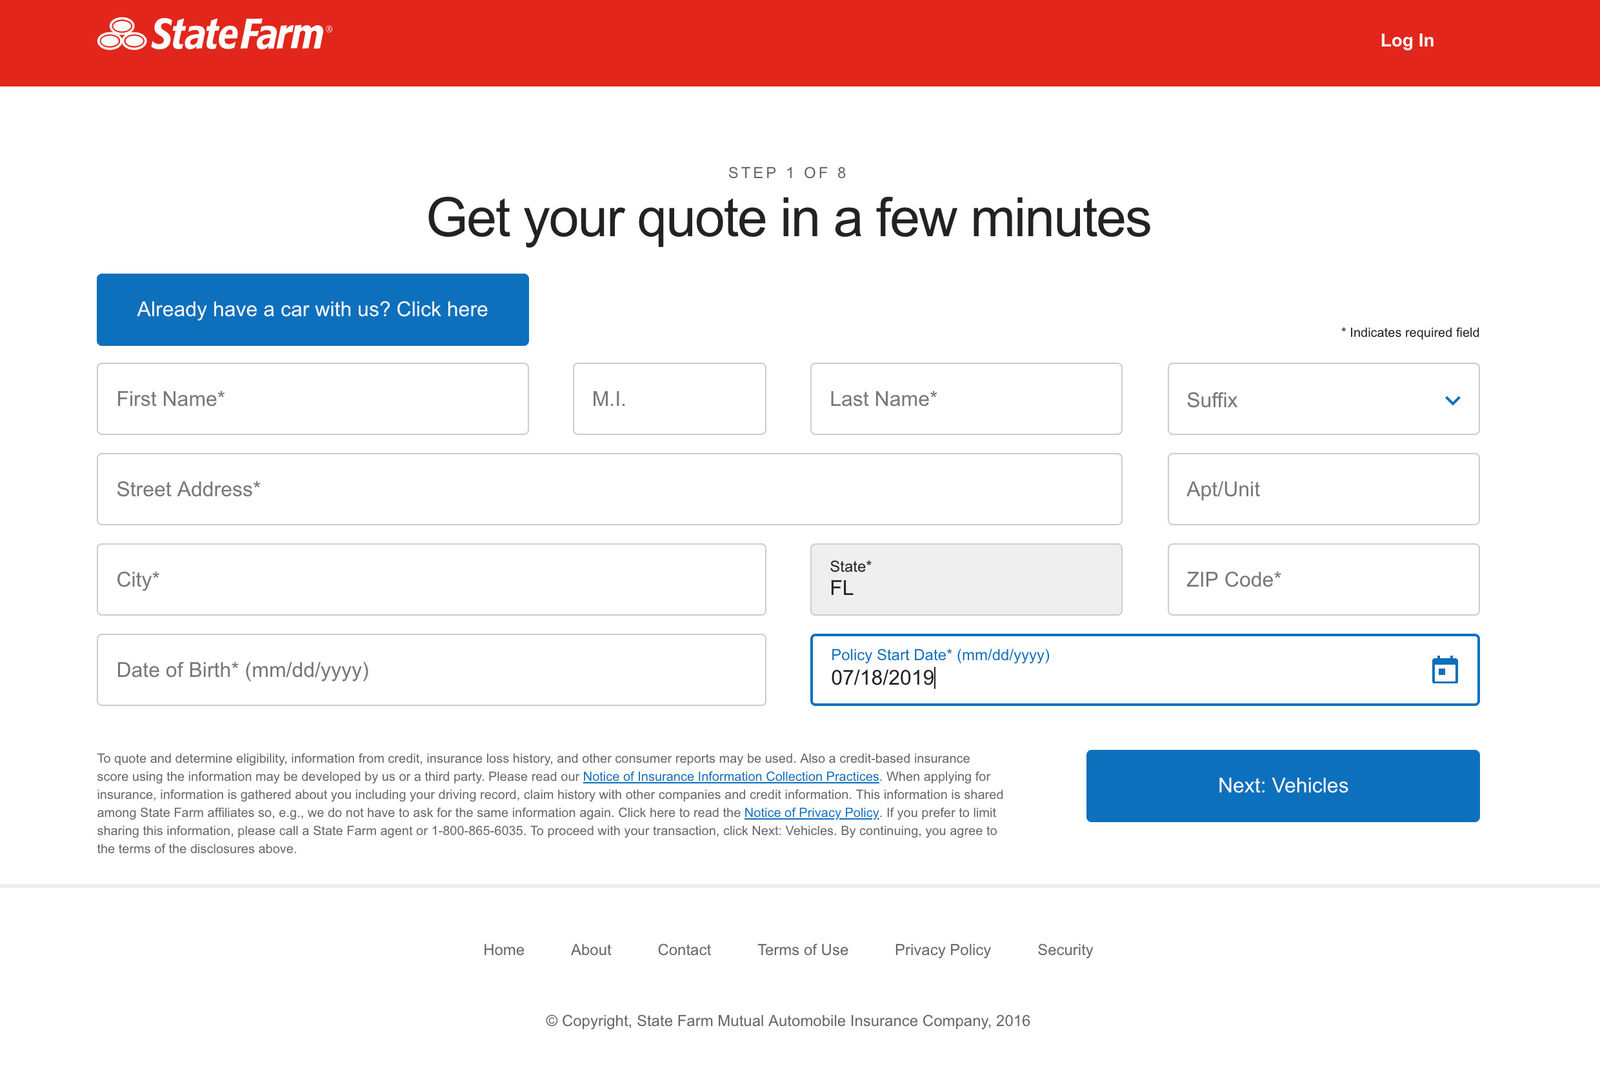 State Farm Quotes personal info